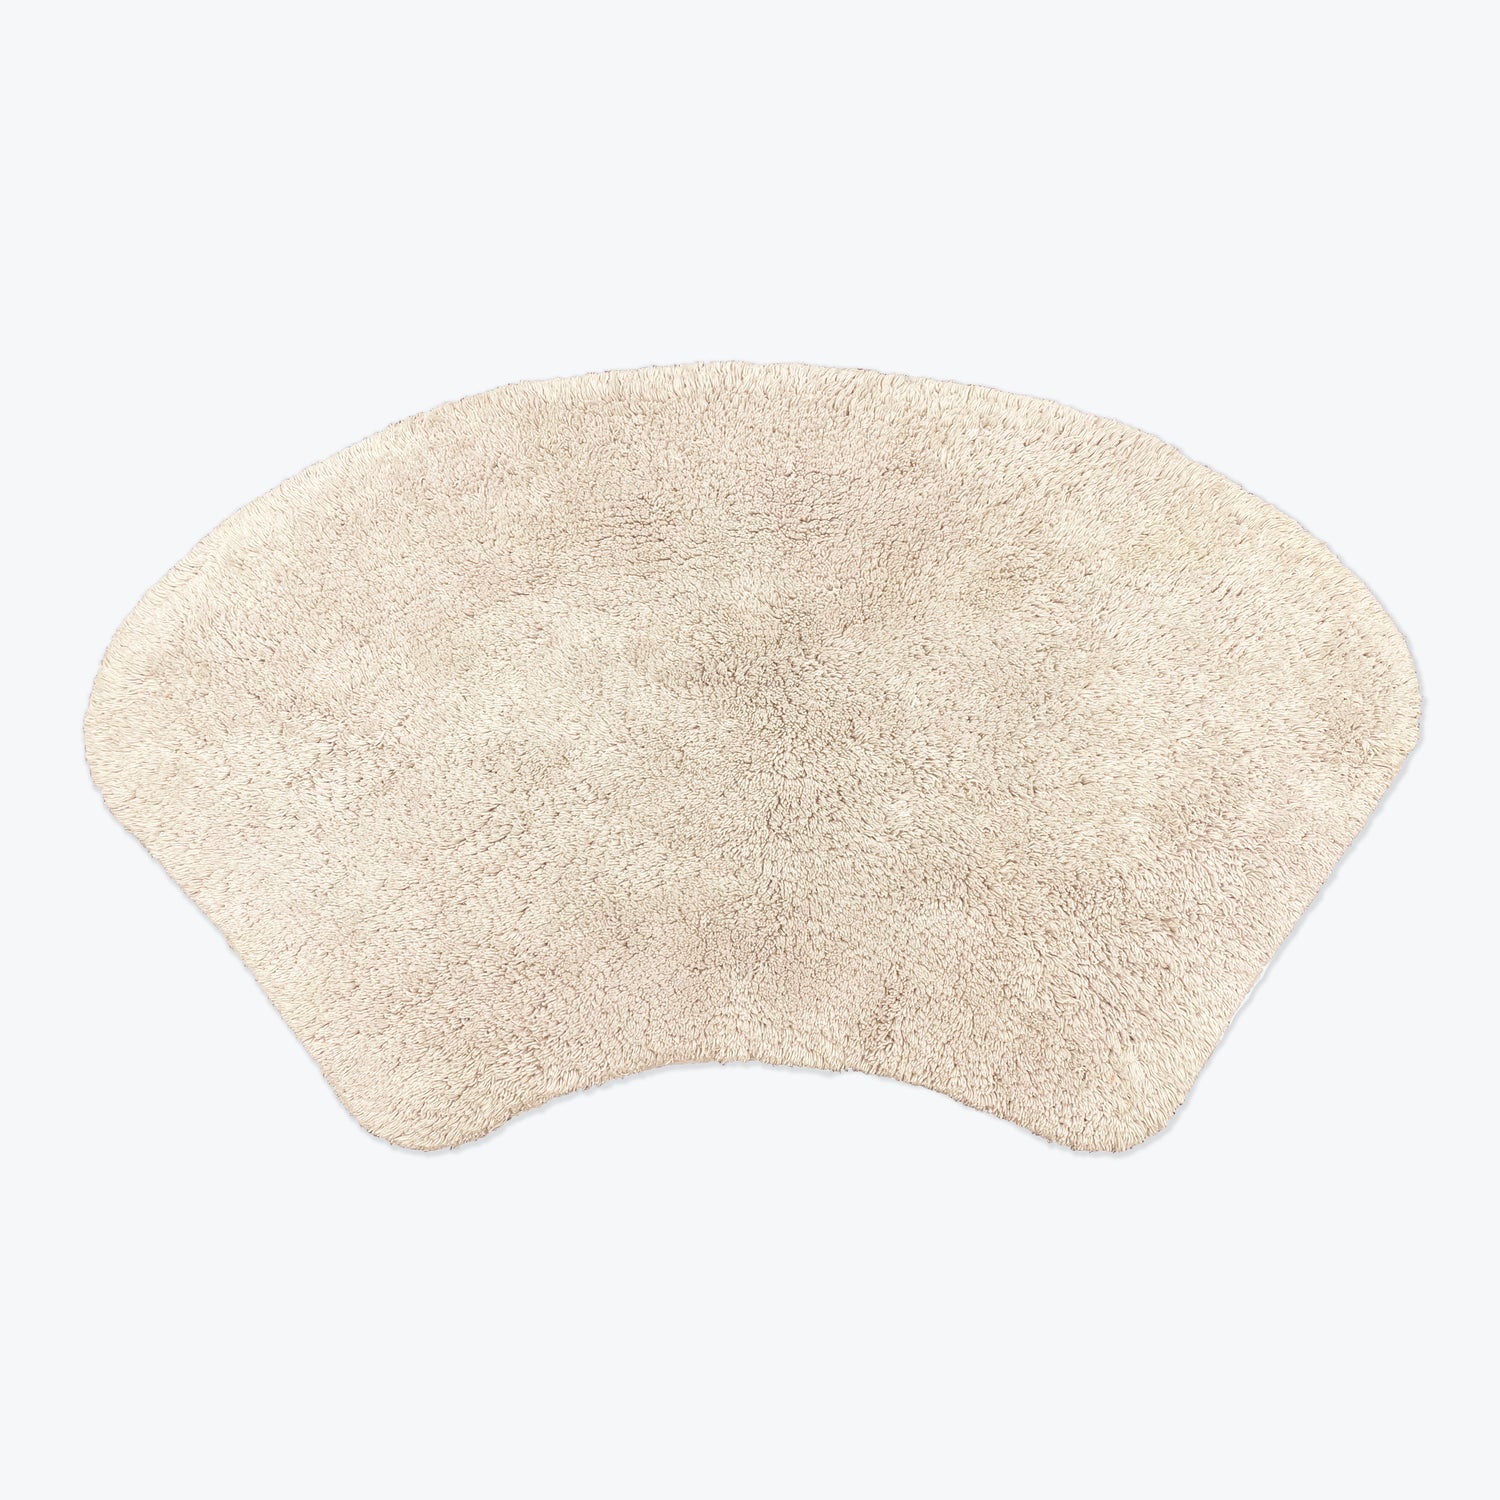 Stone curved shower mat 100% cotton.